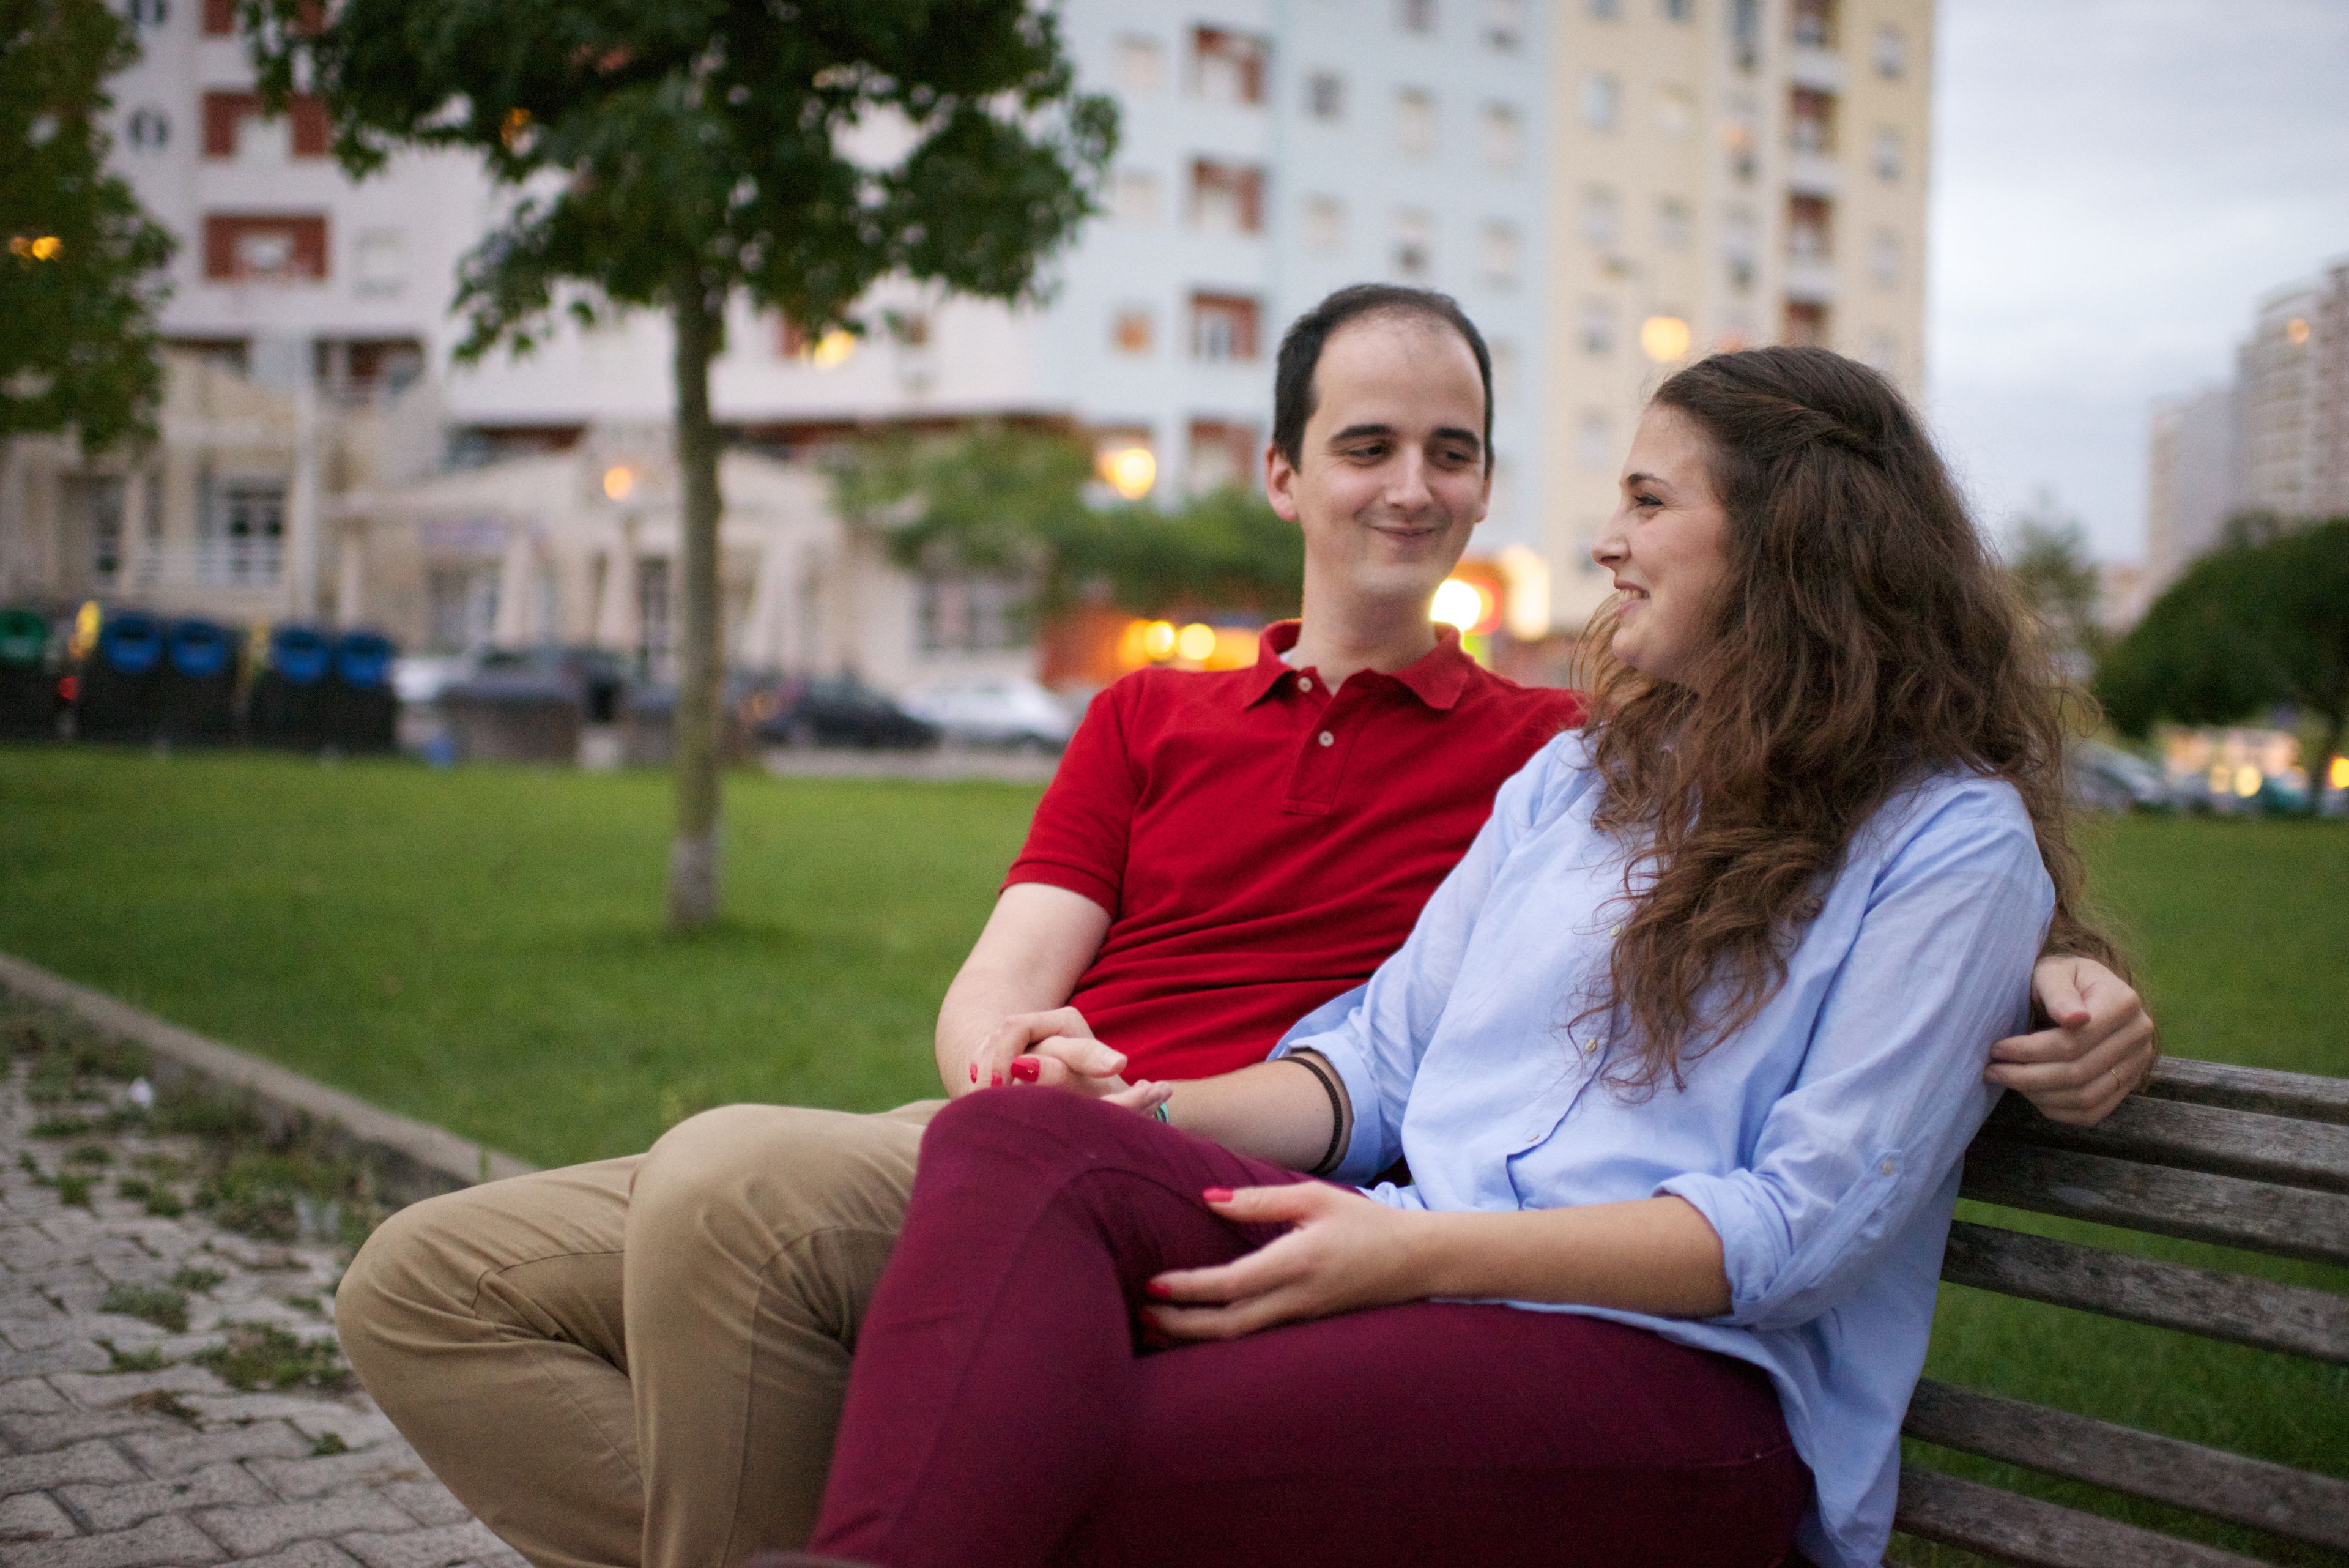 A young couple from Portugal sitting on a wooden bench outside.